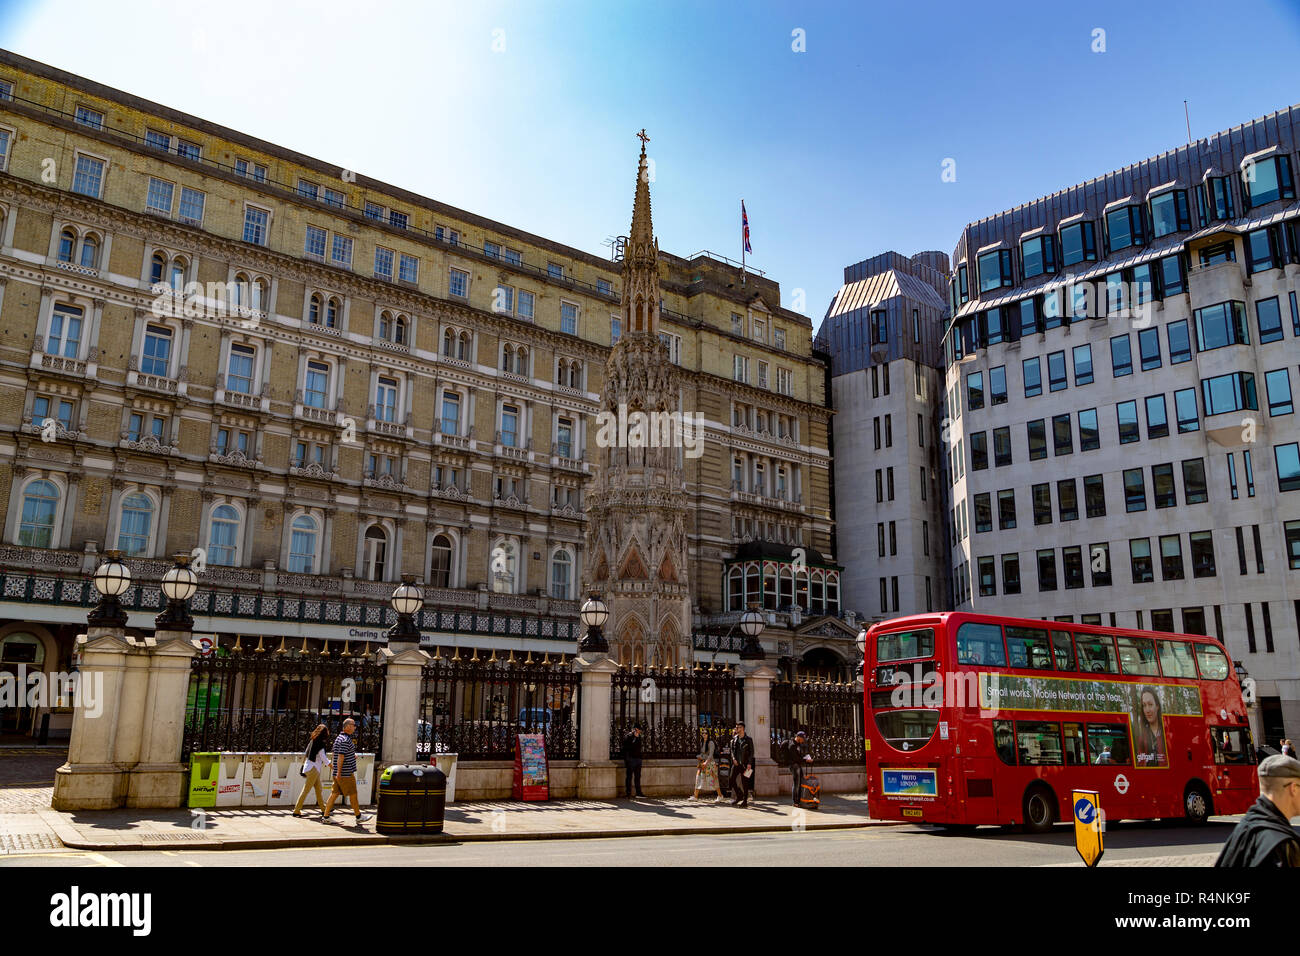 Replacement of the Eleanor Cross monument at Charing Cross Station, London, England Stock Photo